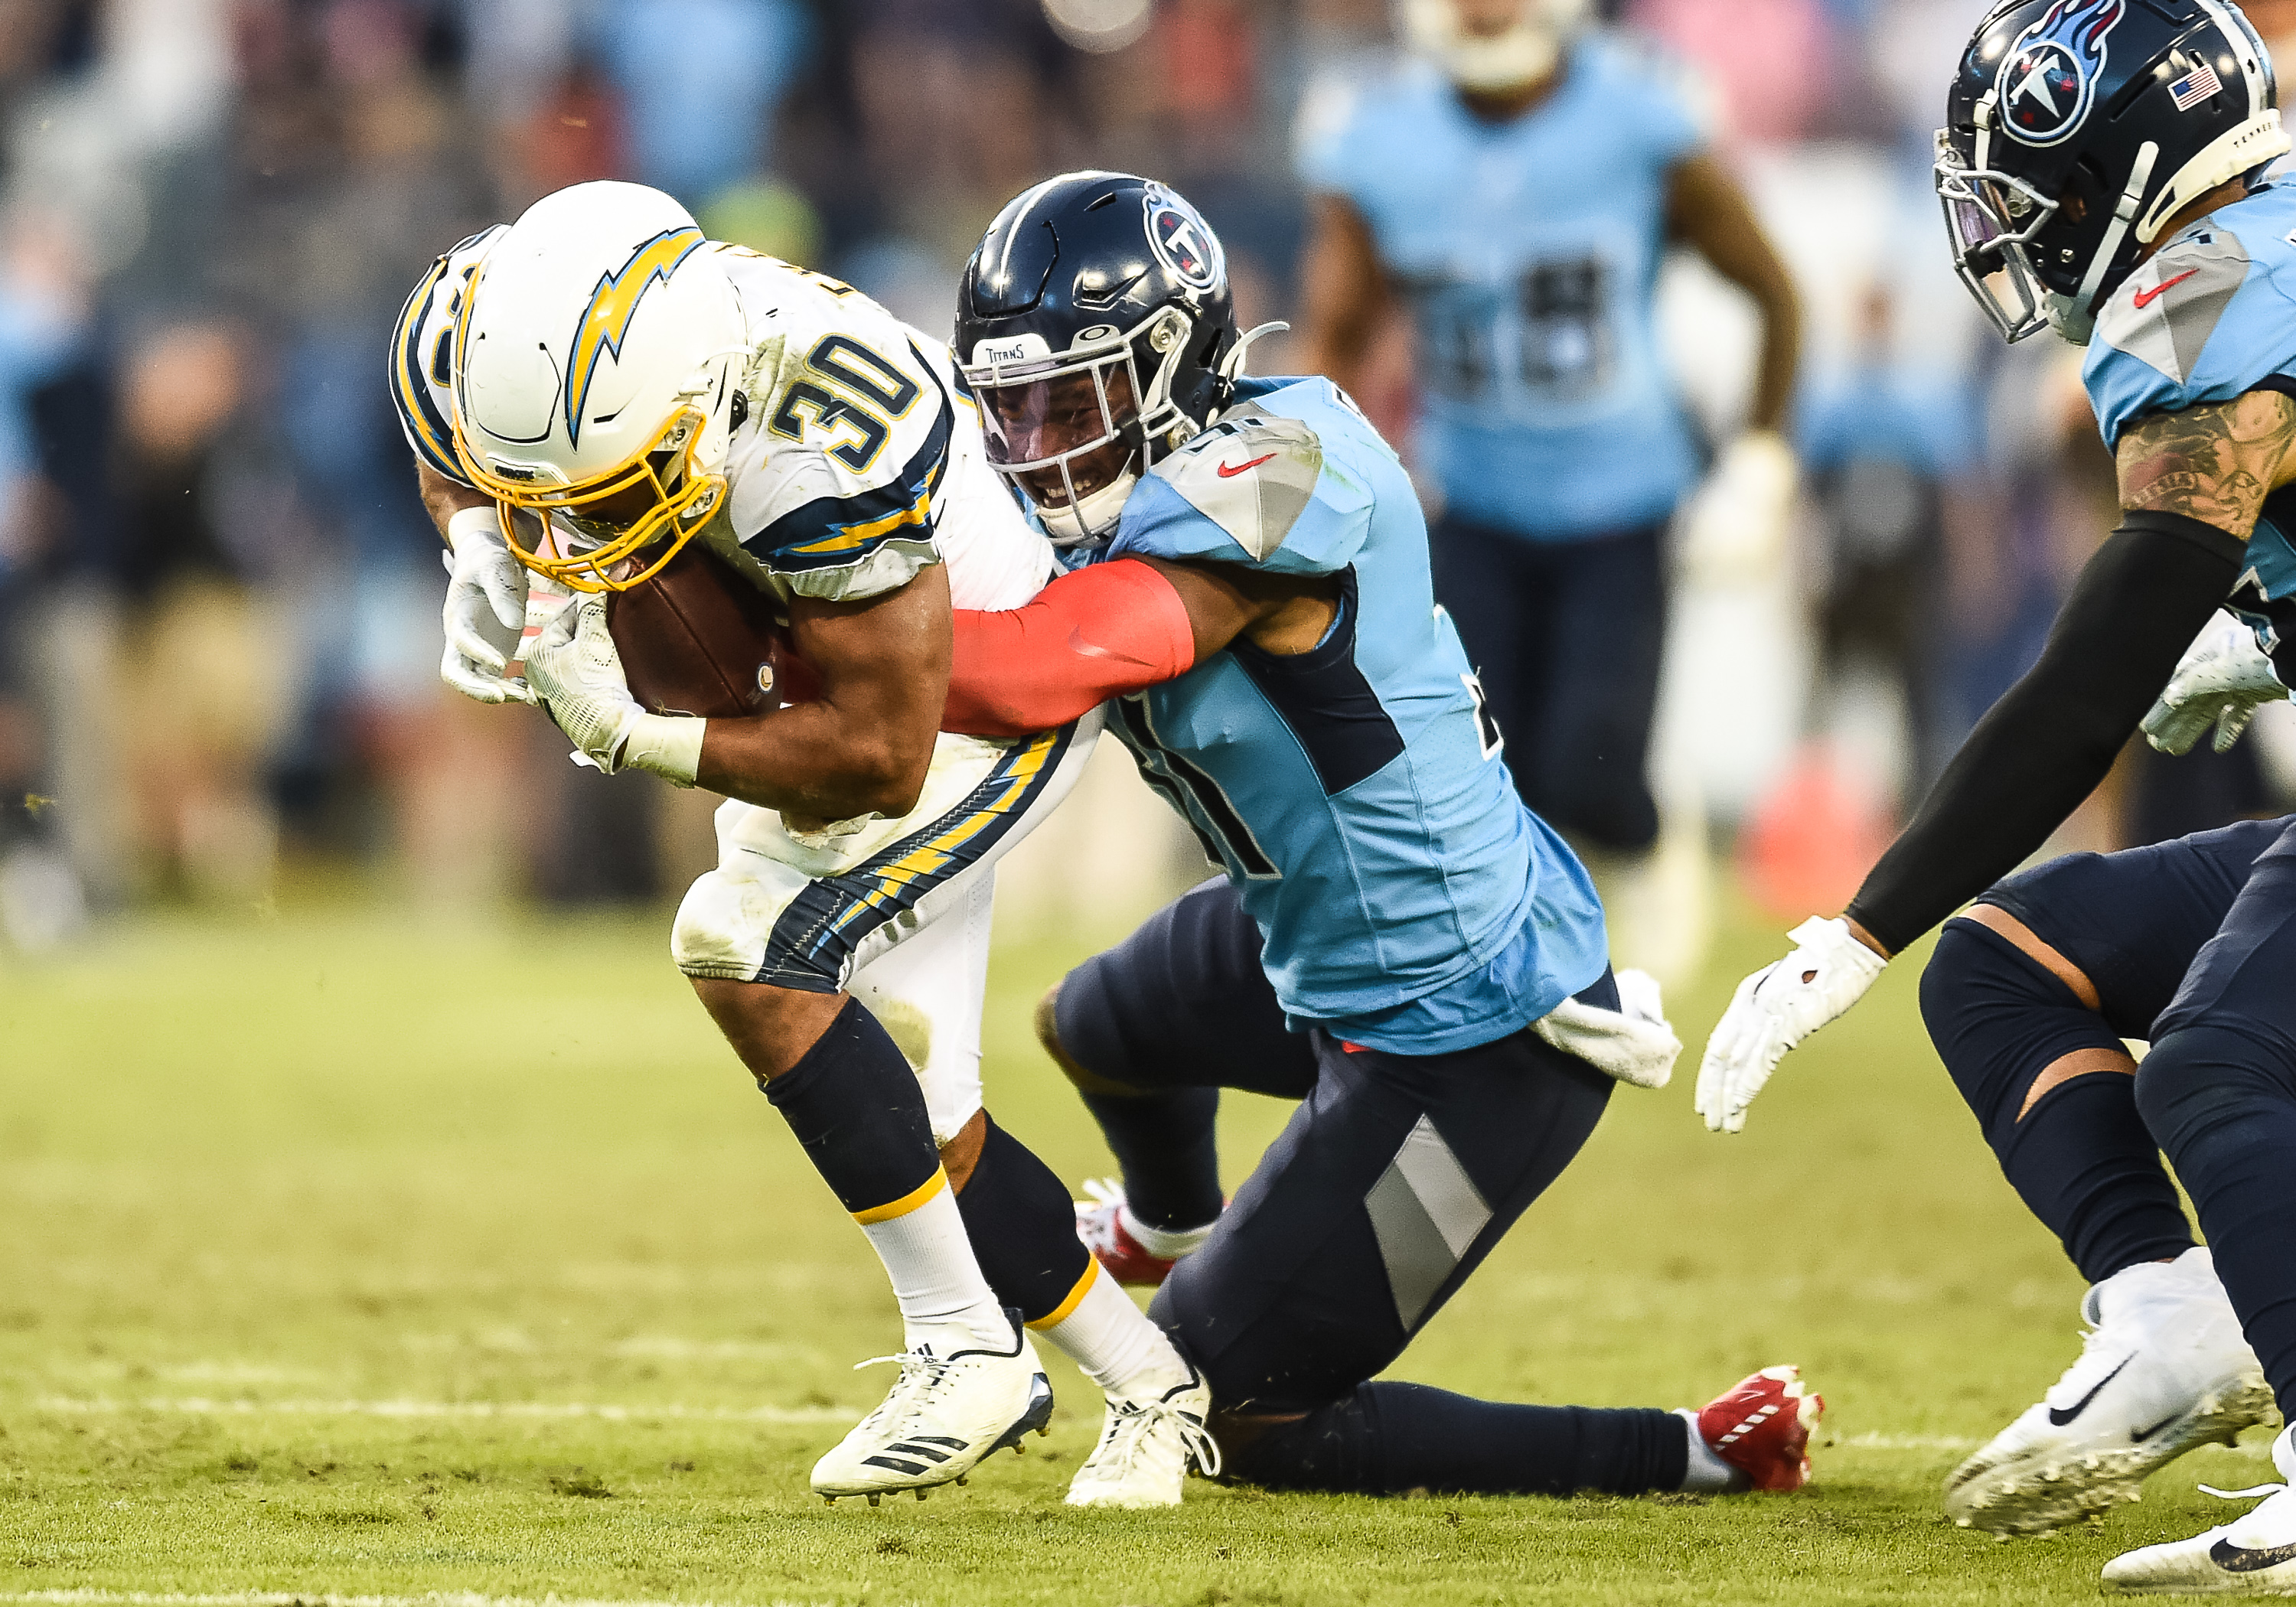 NFL: OCT 20 Chargers at Titans